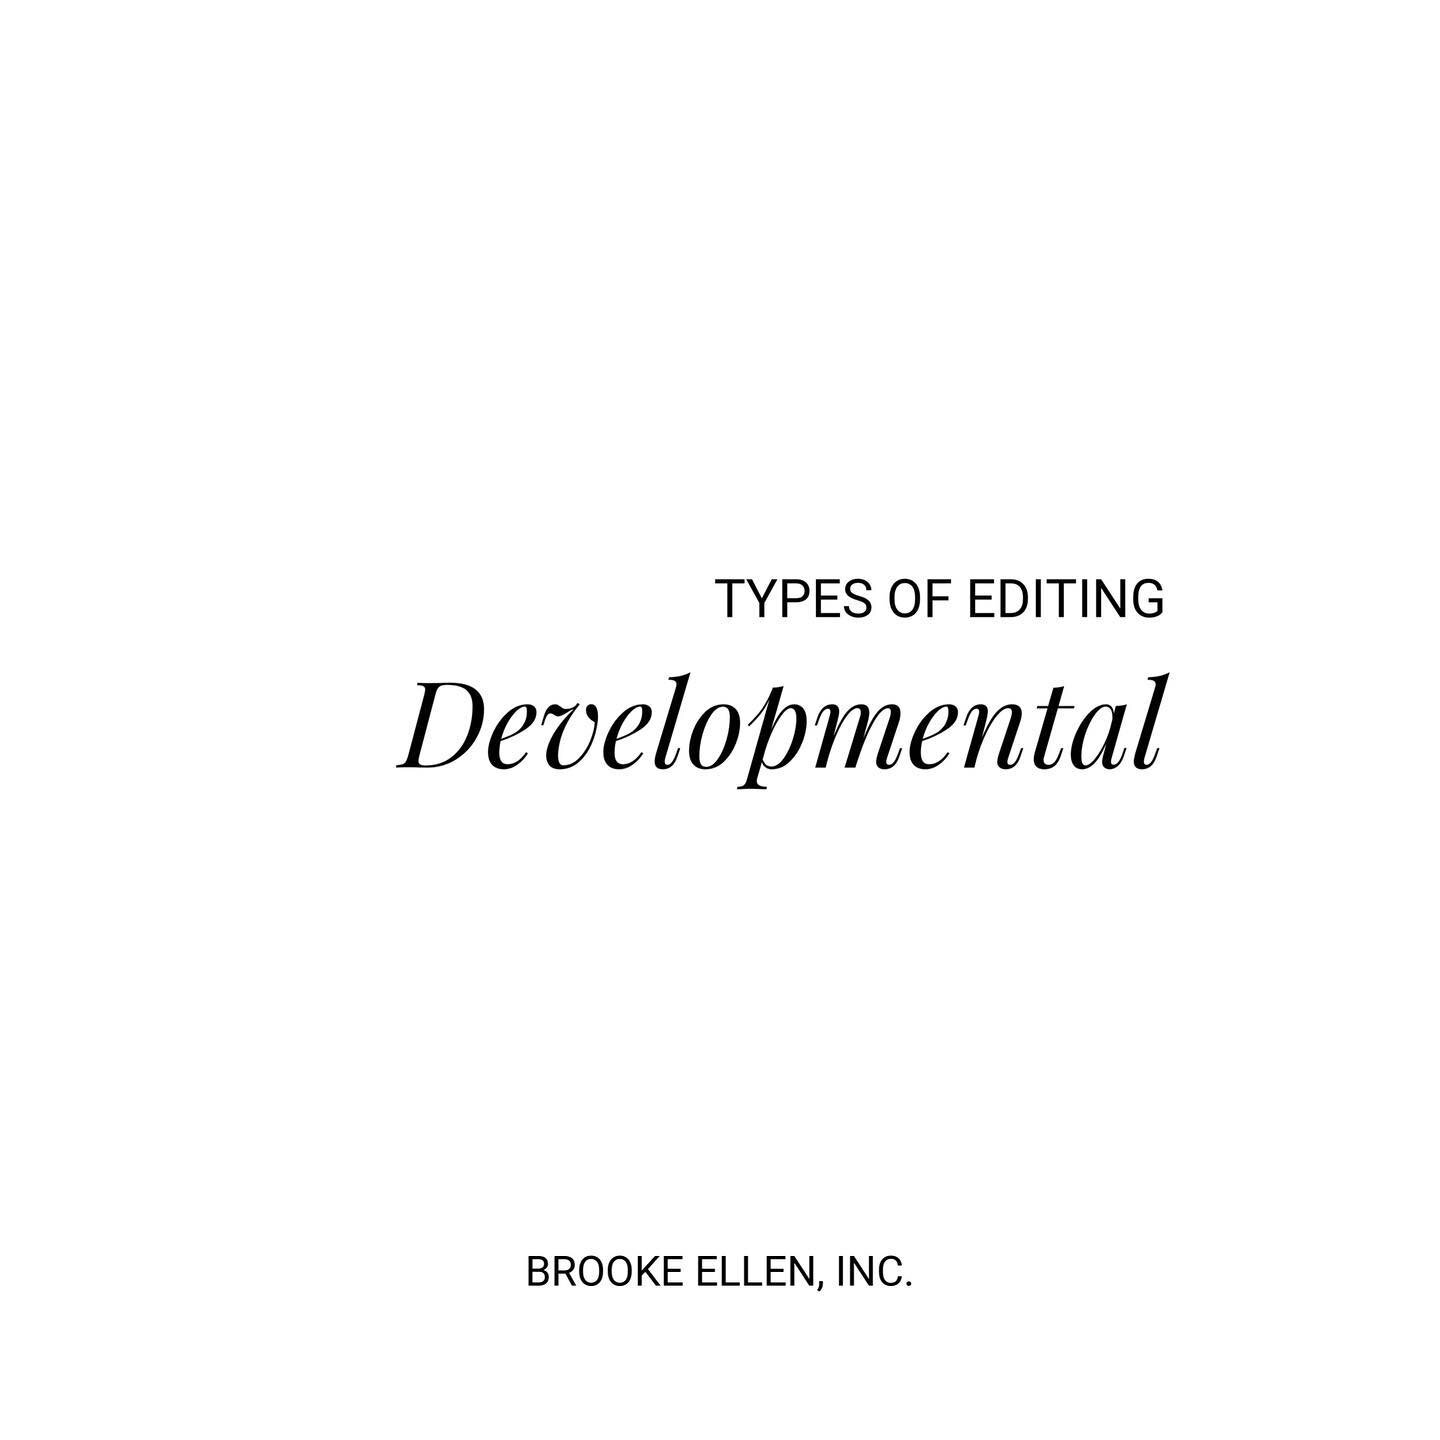 If you are deep into drafting or have just dipped your toe in but are scratching your head wondering what&rsquo;s working and what&rsquo;s not, it&rsquo;s time for a developmental edit.
⁣
From a developmental edit, you get notes about:
1️⃣ Character 